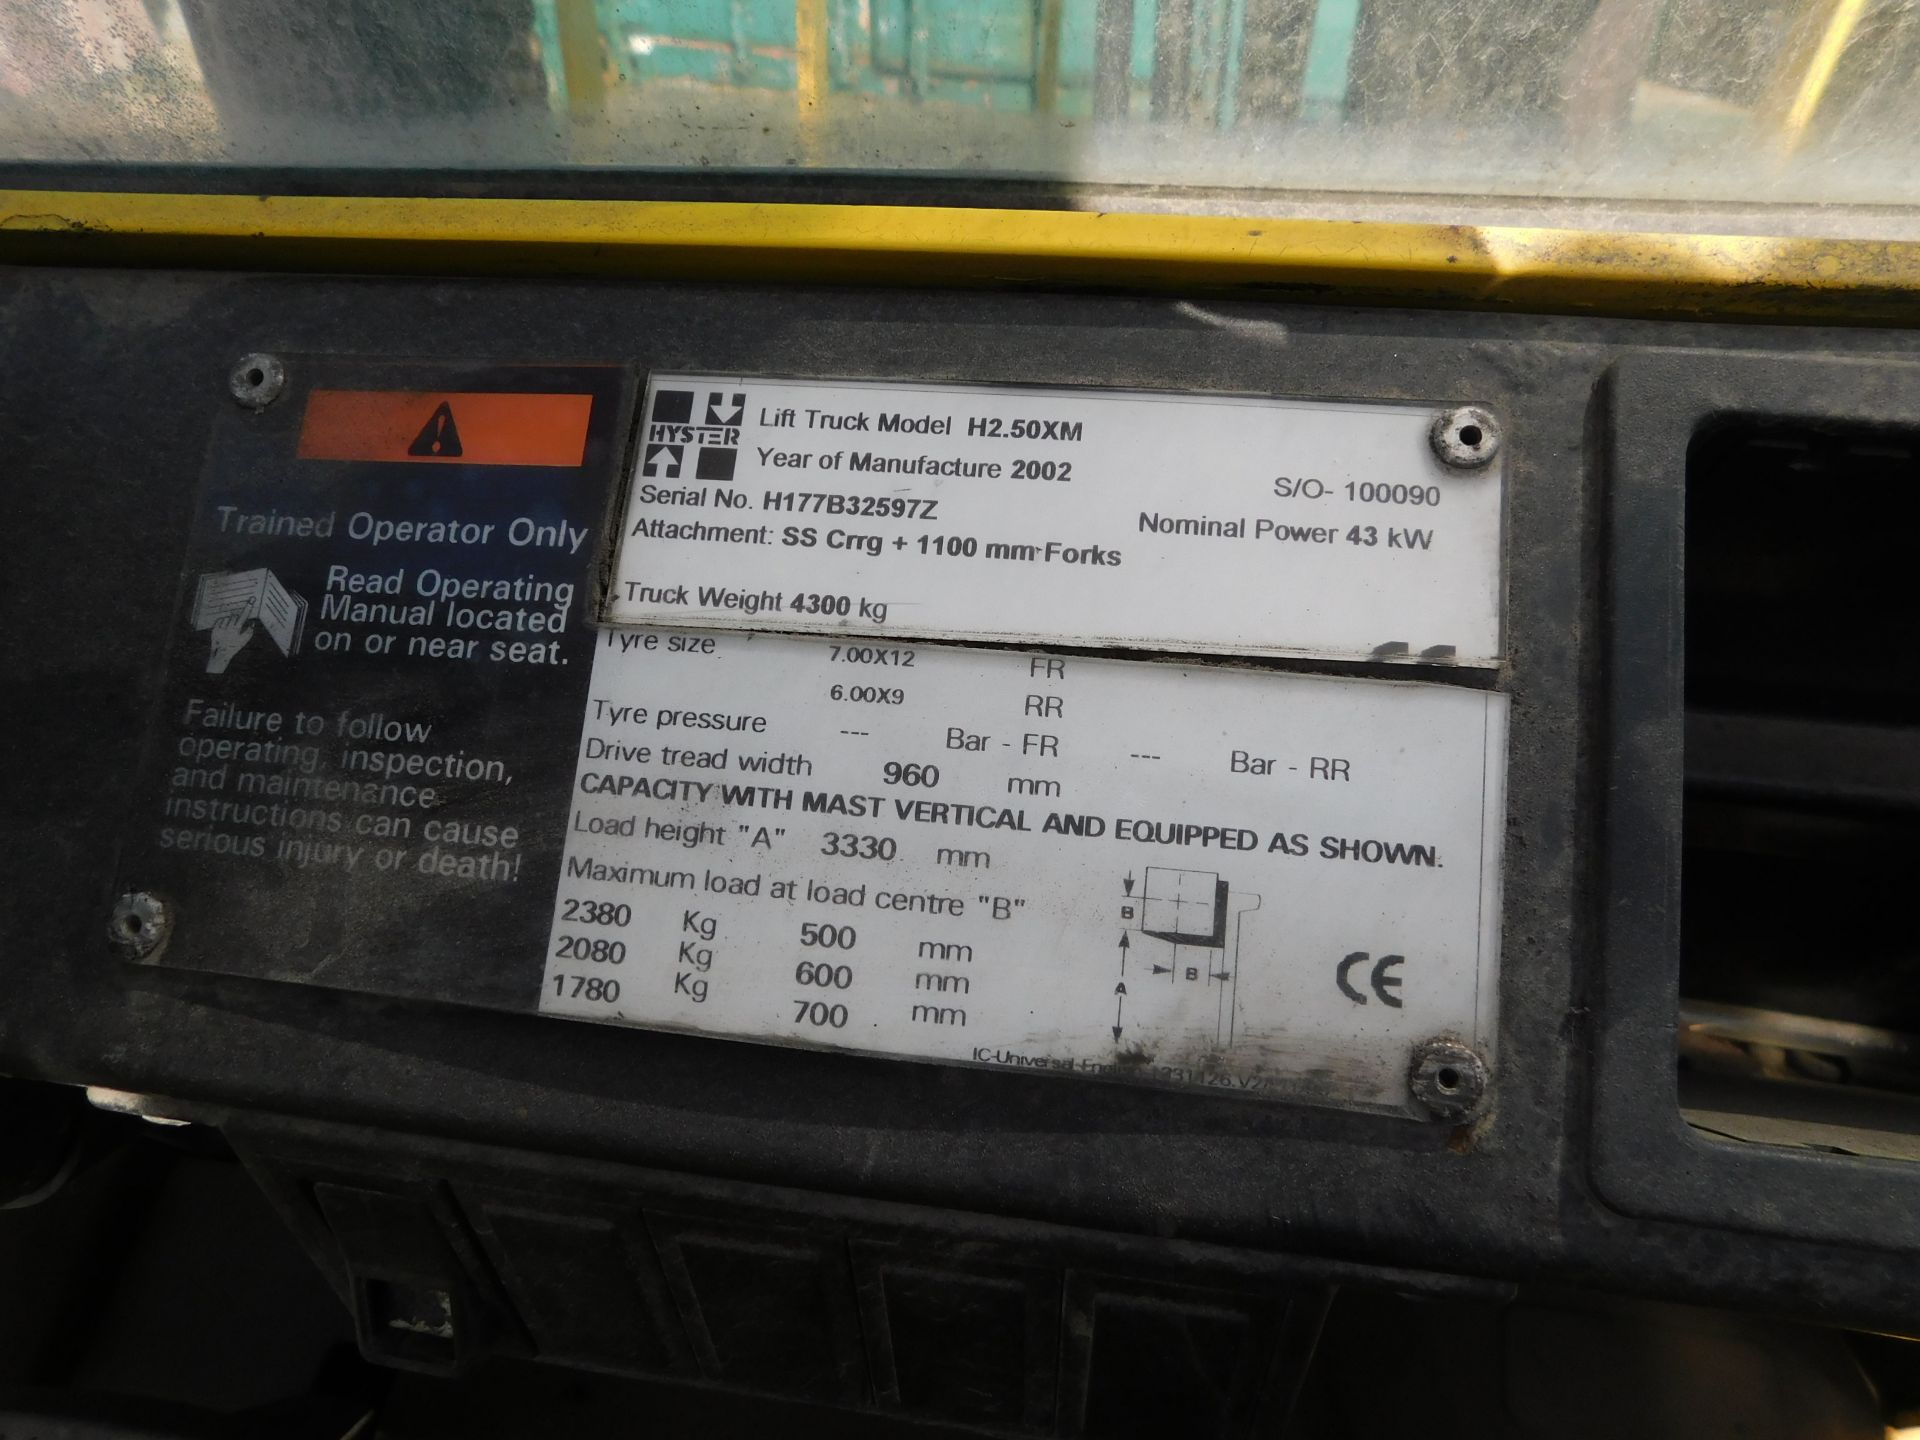 Hyster H2.50XM Diesel Forklift, H177B32597Z (2002), Capacity 2.5t (Collection Thursday 23rd May – - Image 7 of 7